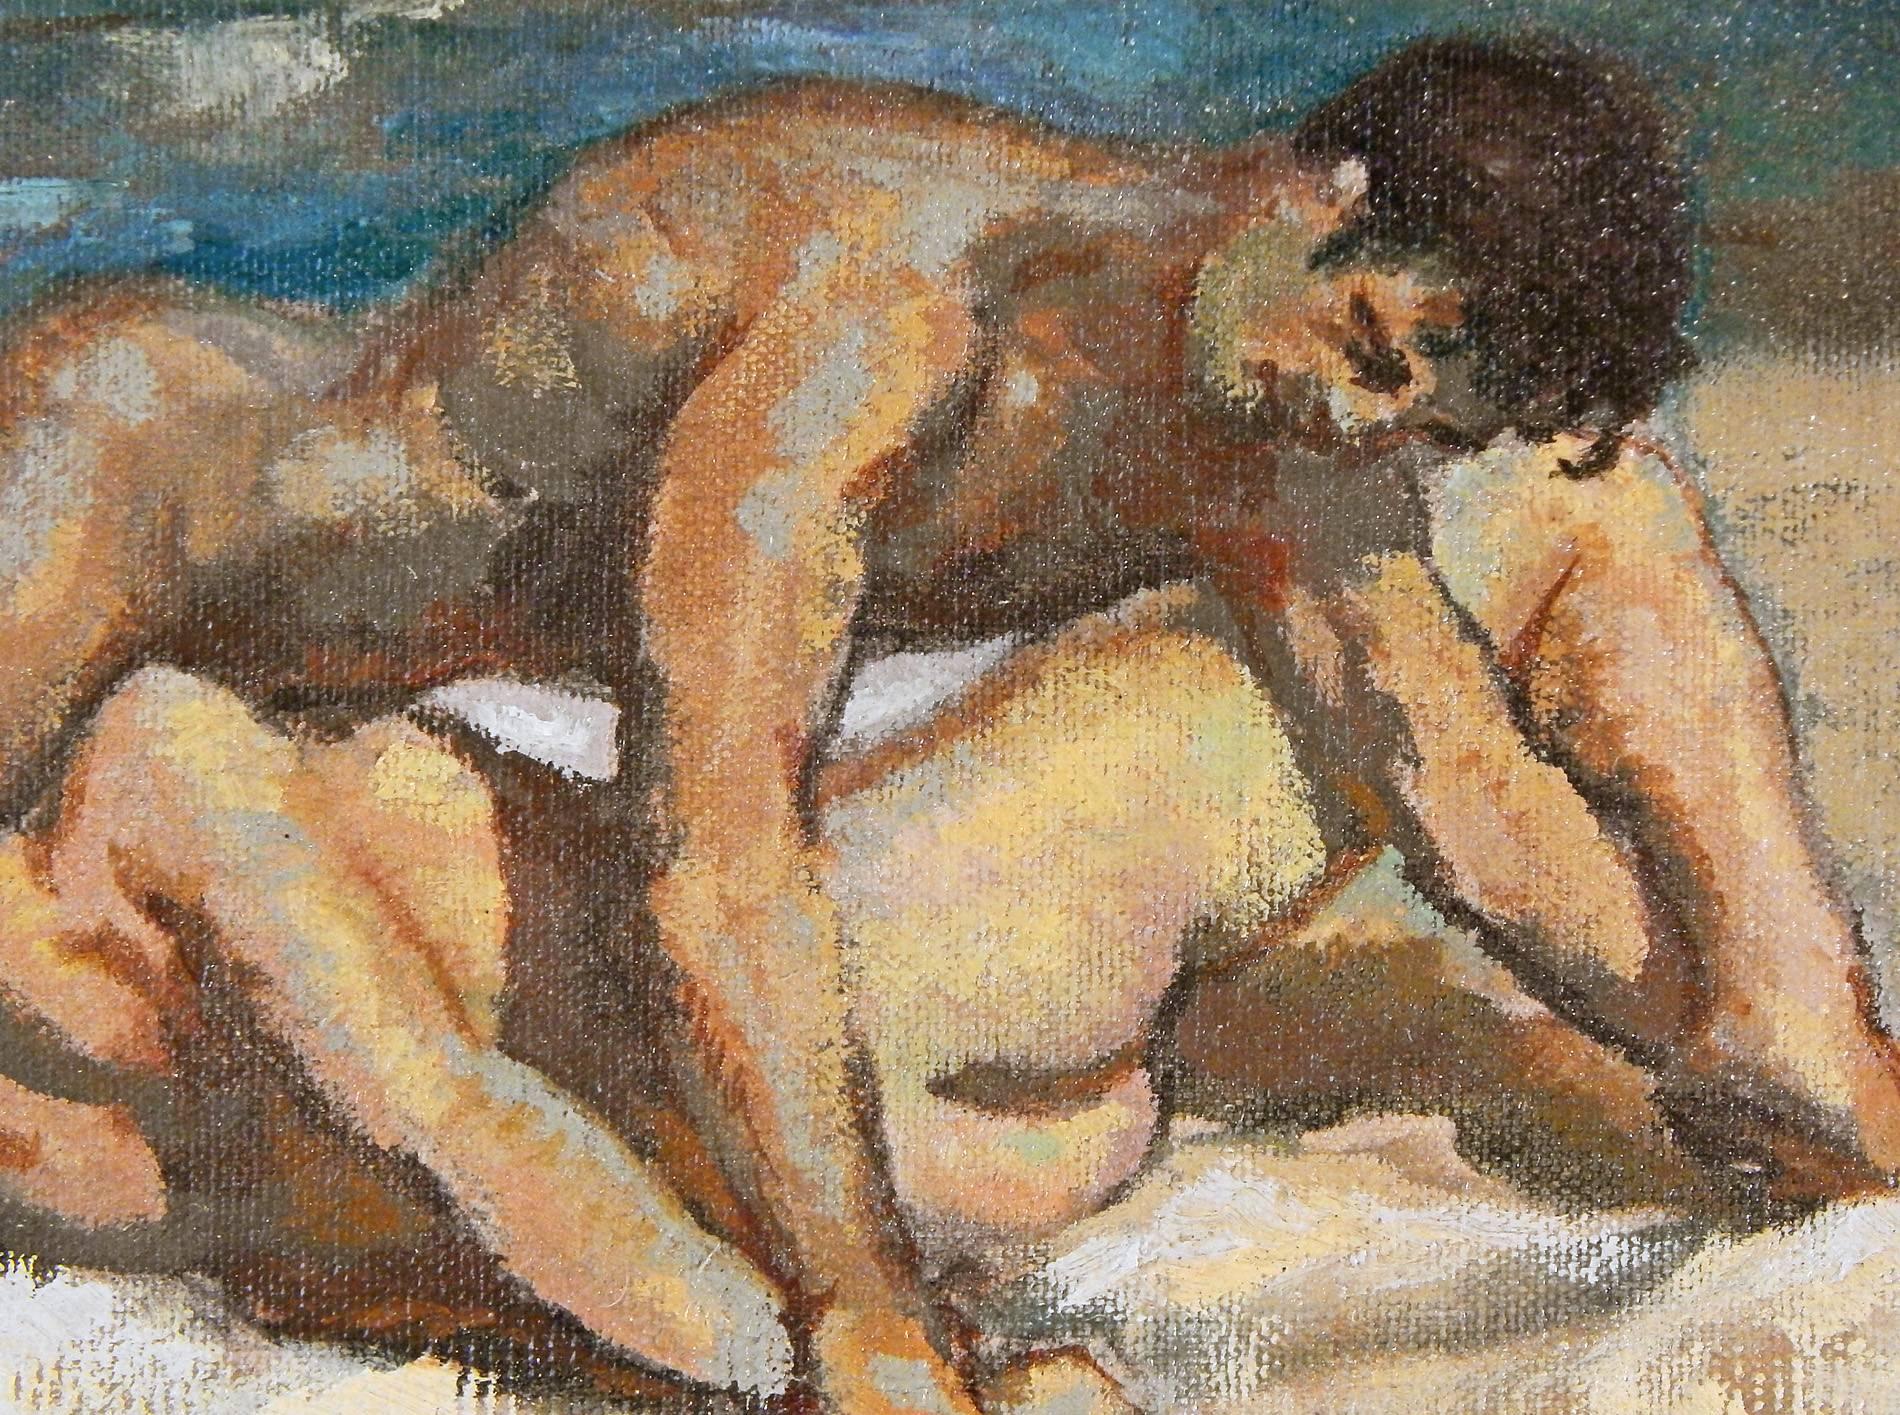 Suggestive of the work of William Littlefield and Edward Melcarth, this scene depicts two nude male figures, warmly lit by the late afternoon sun, wrestling on the sand not far from the edge of the ocean. The artist suffuses the scene with warm,